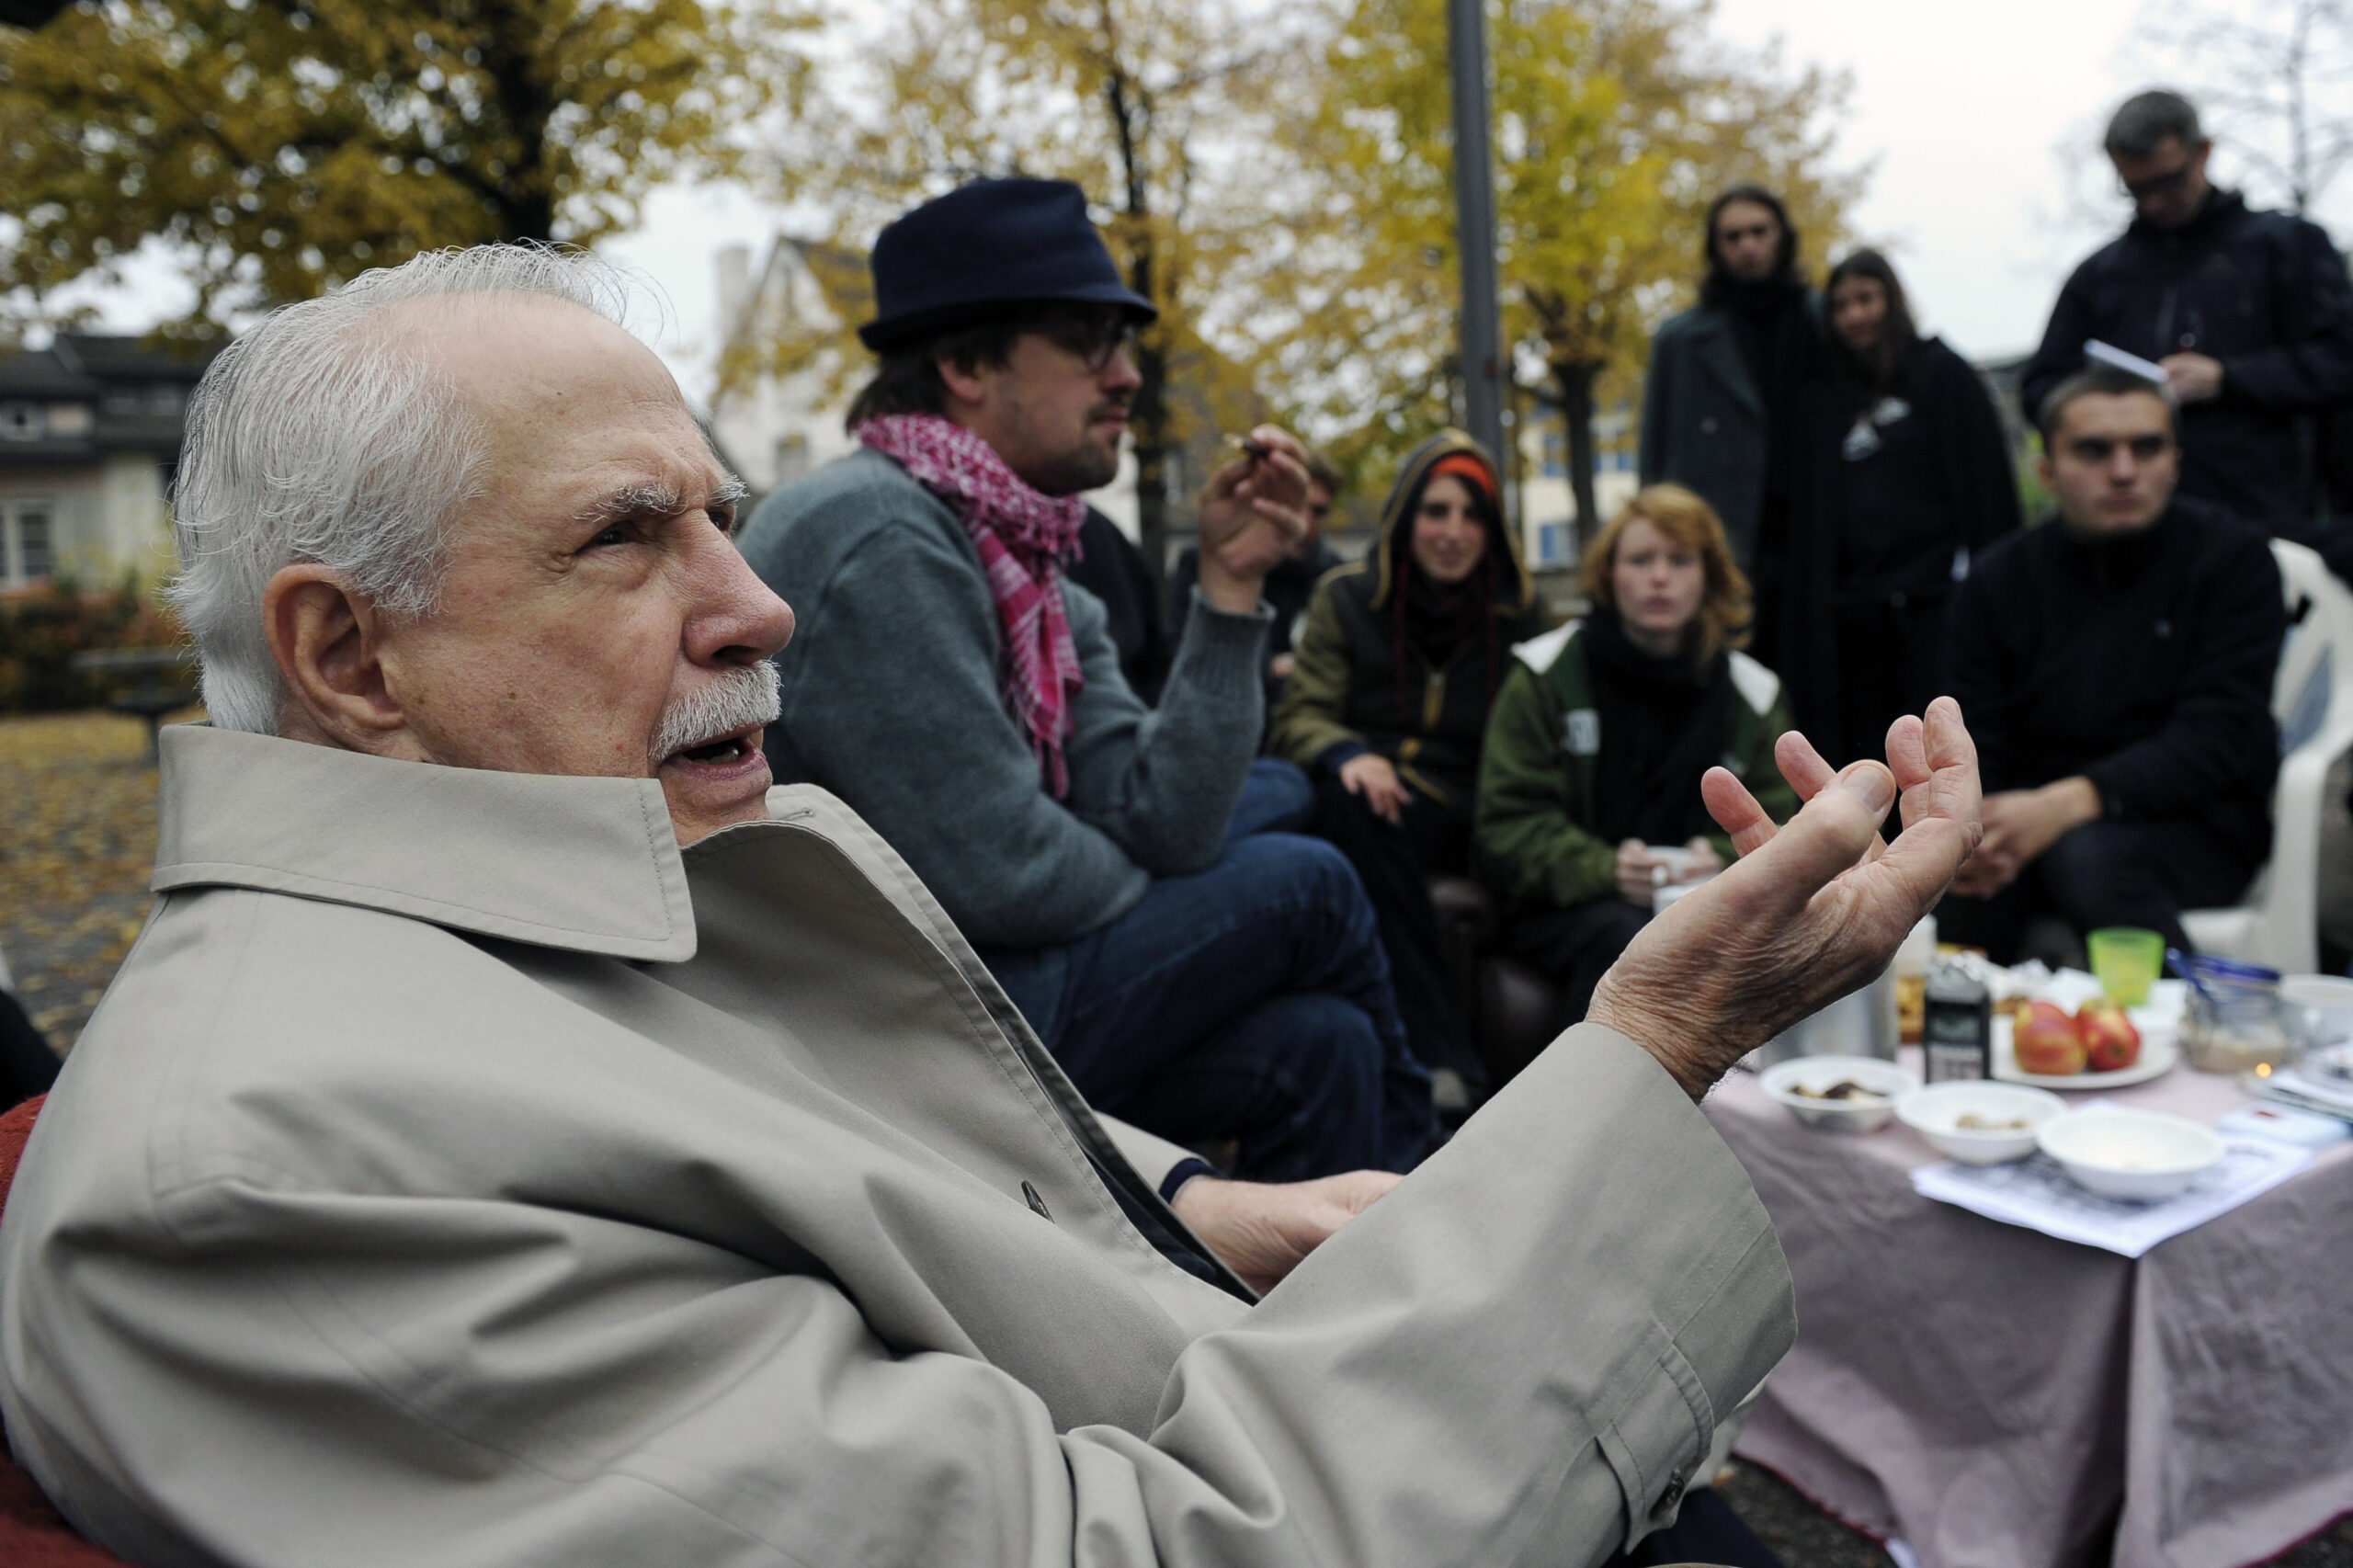 FILE - Former Democratic U.S. senator Mike Gravel gestures while talking to "Occupy" activists at Lindenhof square in Zurich, Switzerland, in this Monday, Oct. 31, 2011, file photo. Gravel, a former U.S. senator from Alaska who read the Pentagon Papers into the Congressional Record and confronted Barack Obama about nuclear weapons during a later presidential run, has died. He was 91. Gravel, who represented Alaska as a Democrat in the Senate from 1969 to 1981, died Saturday, June 26, 2021. Gravel had been living in Seaside, California, and was in failing health, said Theodore W. Johnson, a former aide. (AP Photo/Keystone, Steffen Schmidt, File)